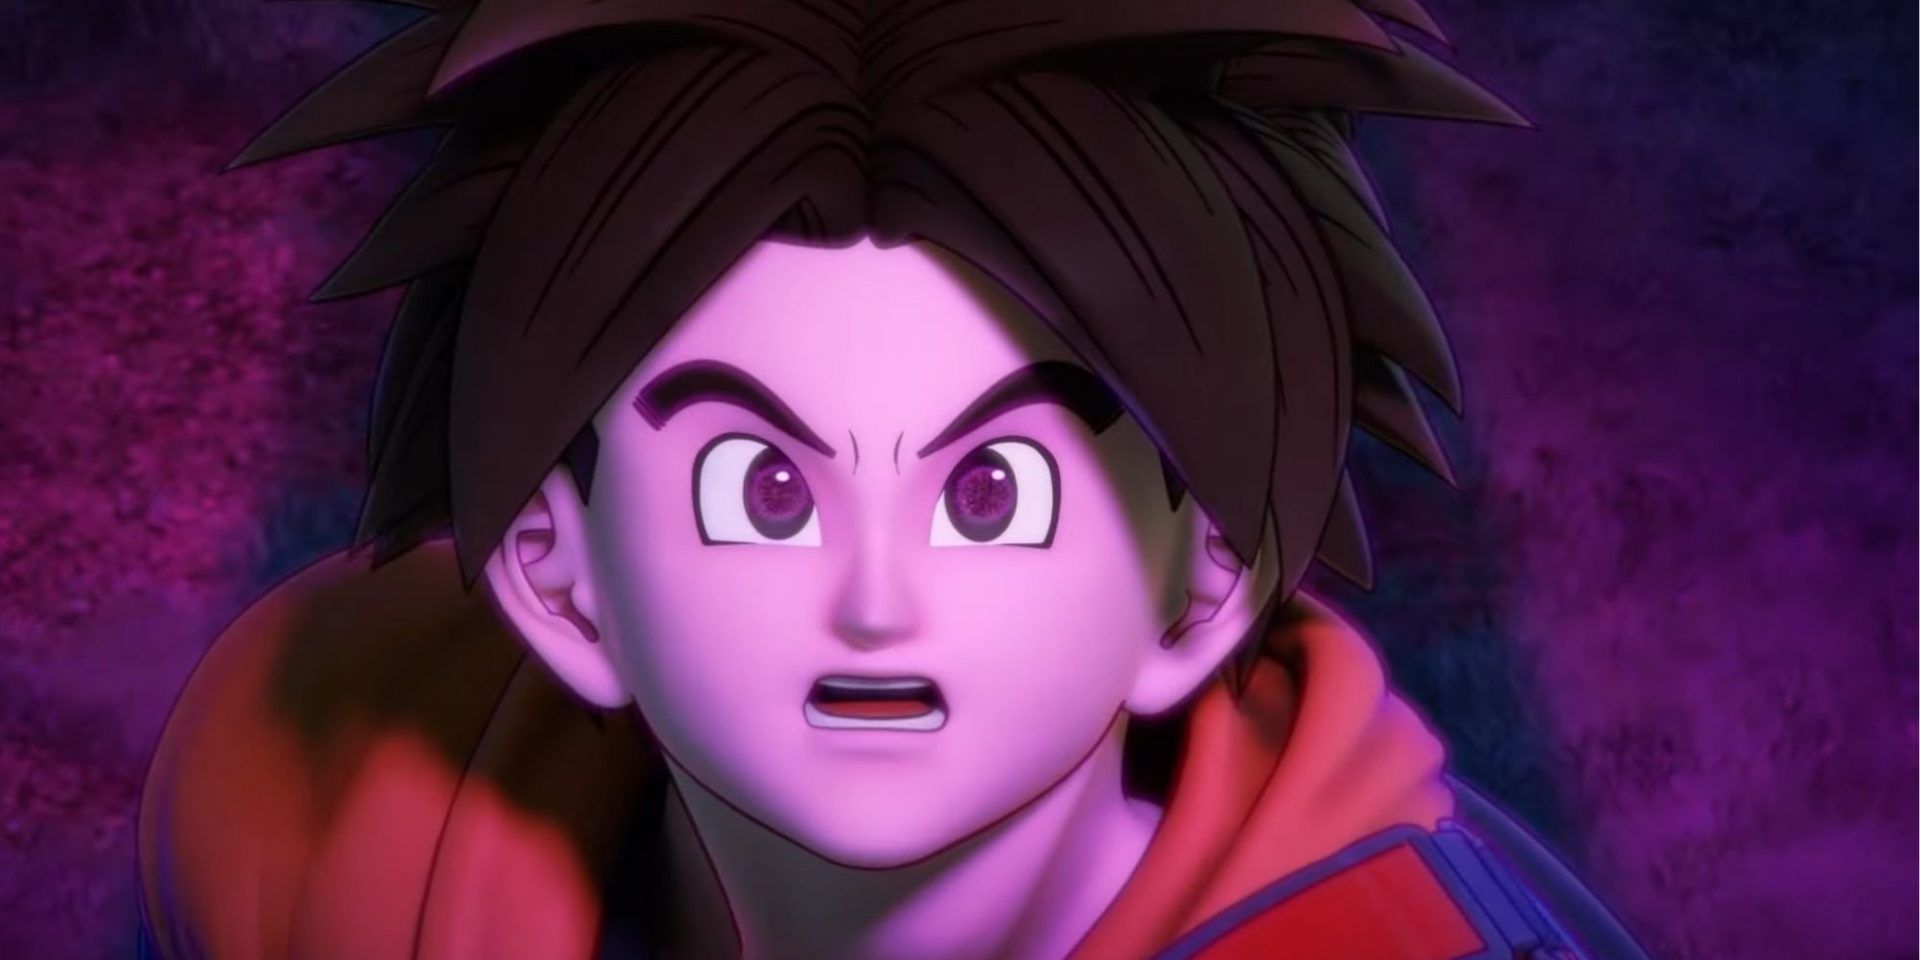 Dragon Ball: The Breakers confirms release date, editions and